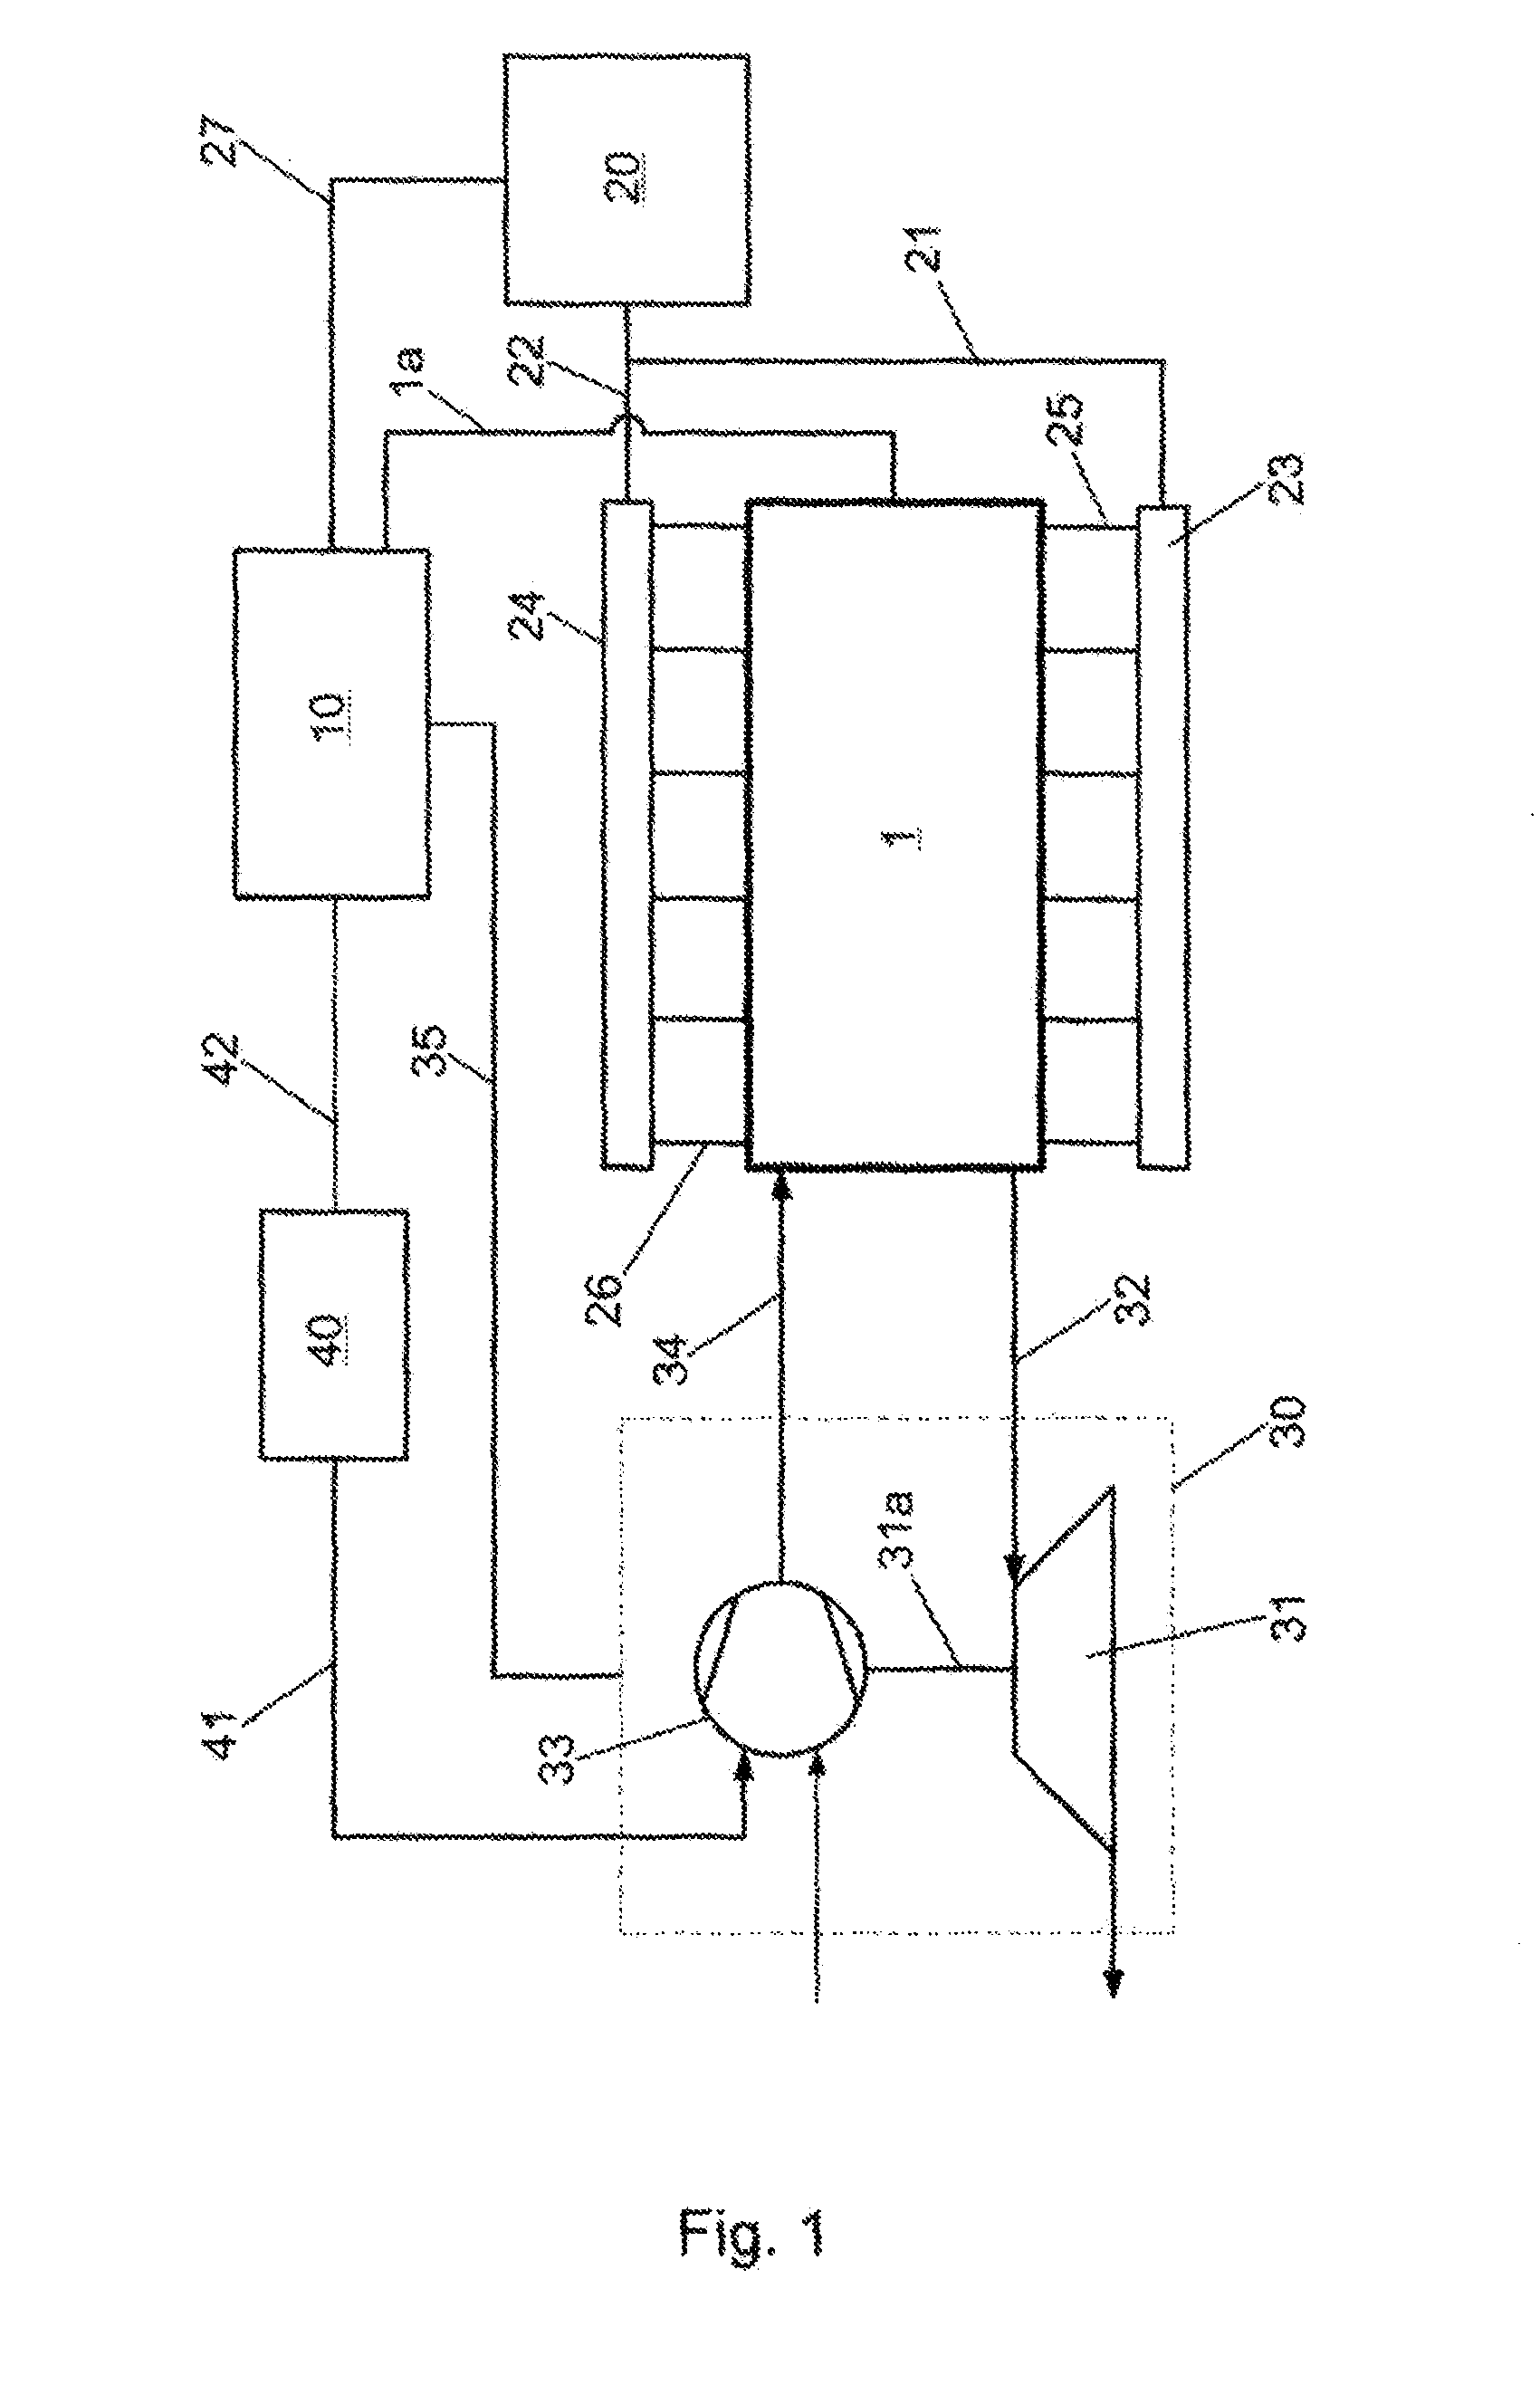 Internal Combustion Engine And Method For Controlling The Operation Of The Internal Combustion Engine